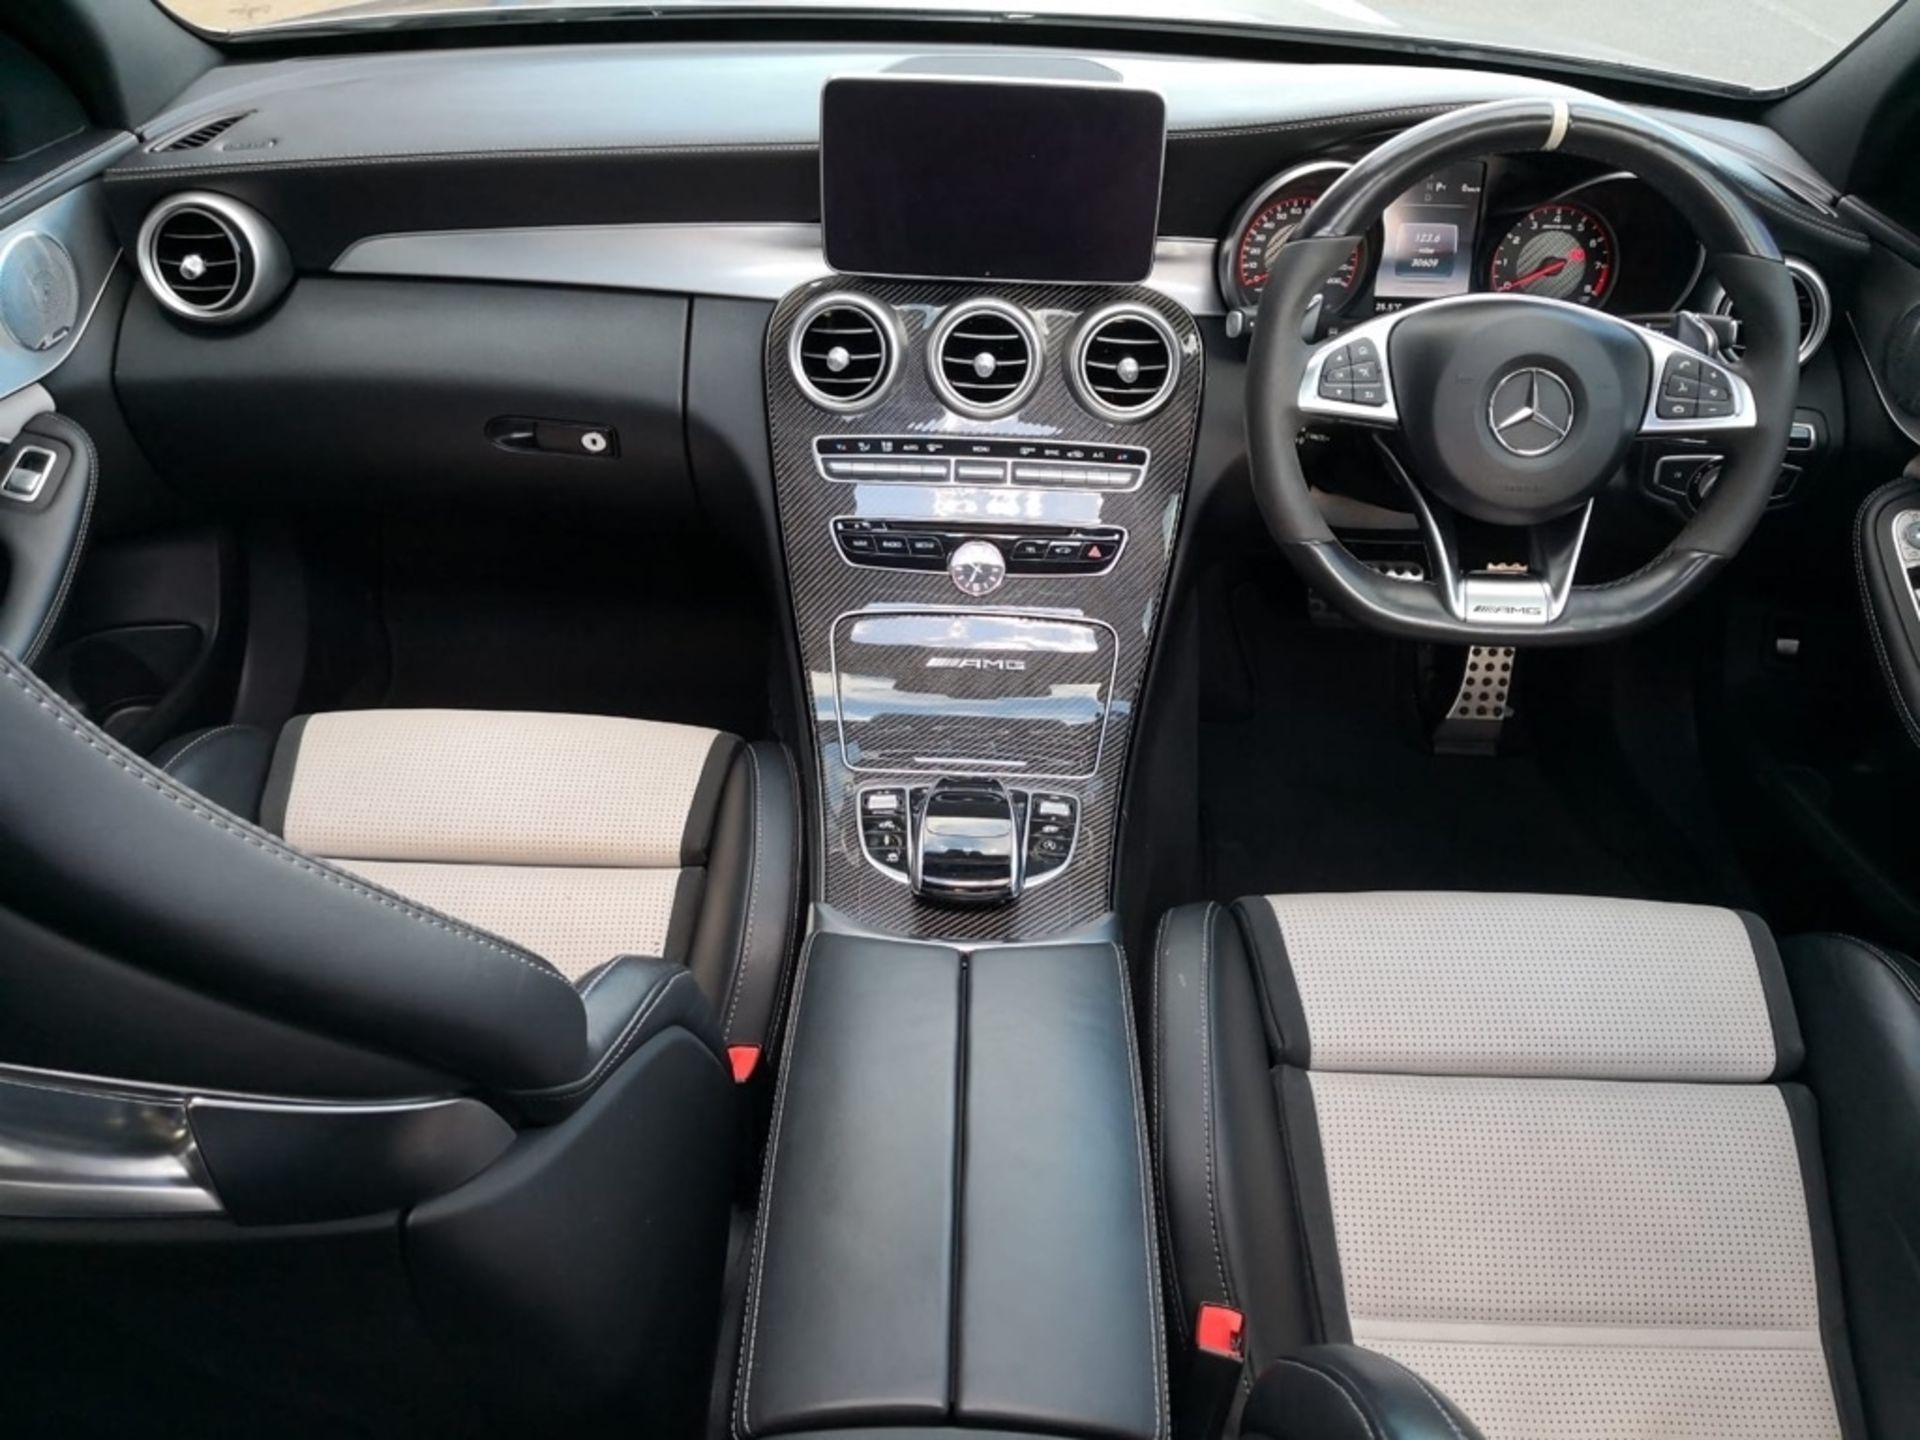 Mercedes-Benz C Class 4.0 C63 AMG S 4 Dr – Automatic – Petrol – WhiteReg: PW15 AMG - 2015Mileage: - Image 4 of 8